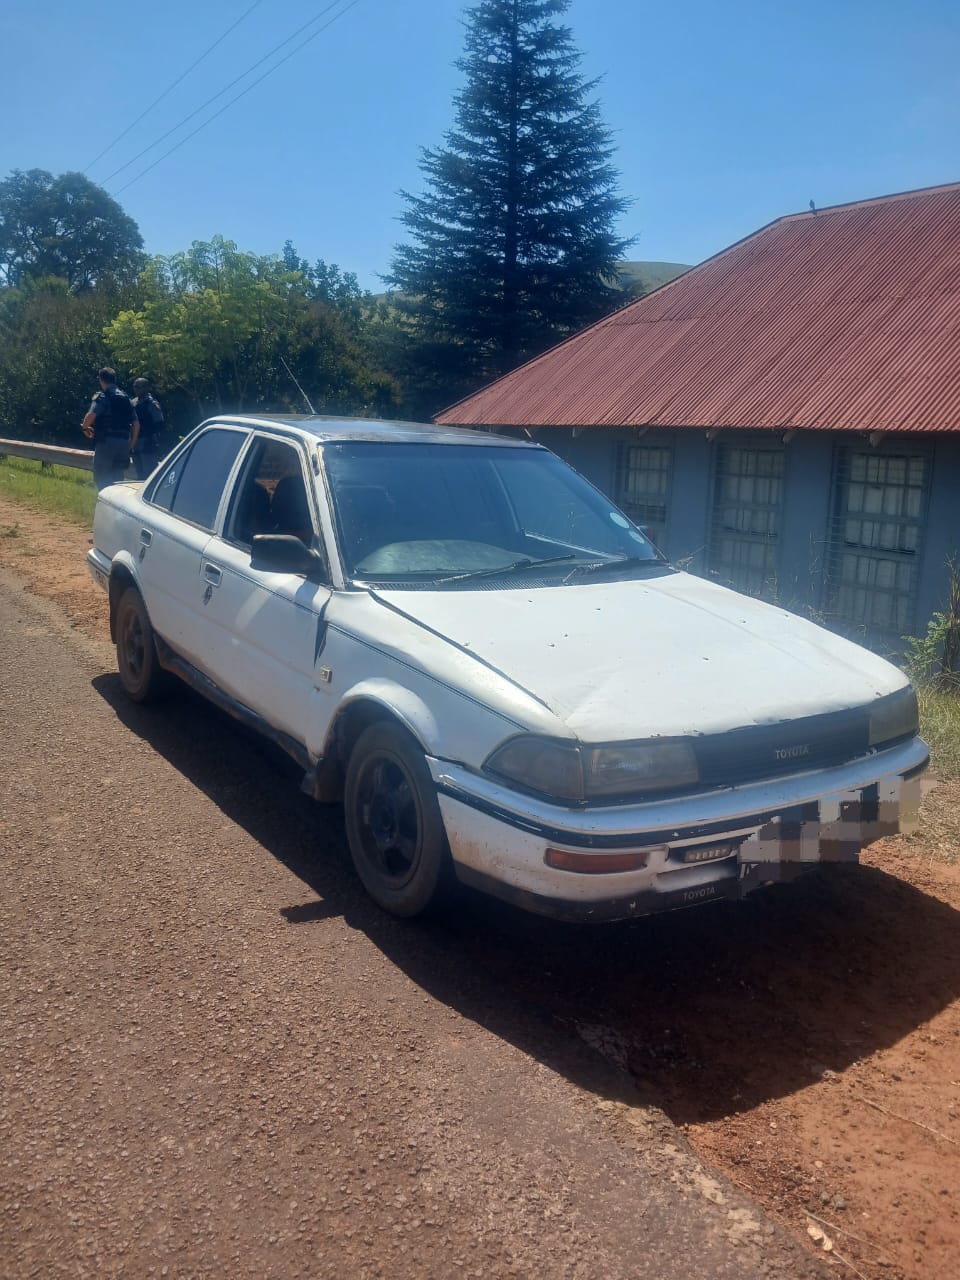 Vehicle stolen in the Eastern Cape 14 years ago, recovered in Mpumalanga